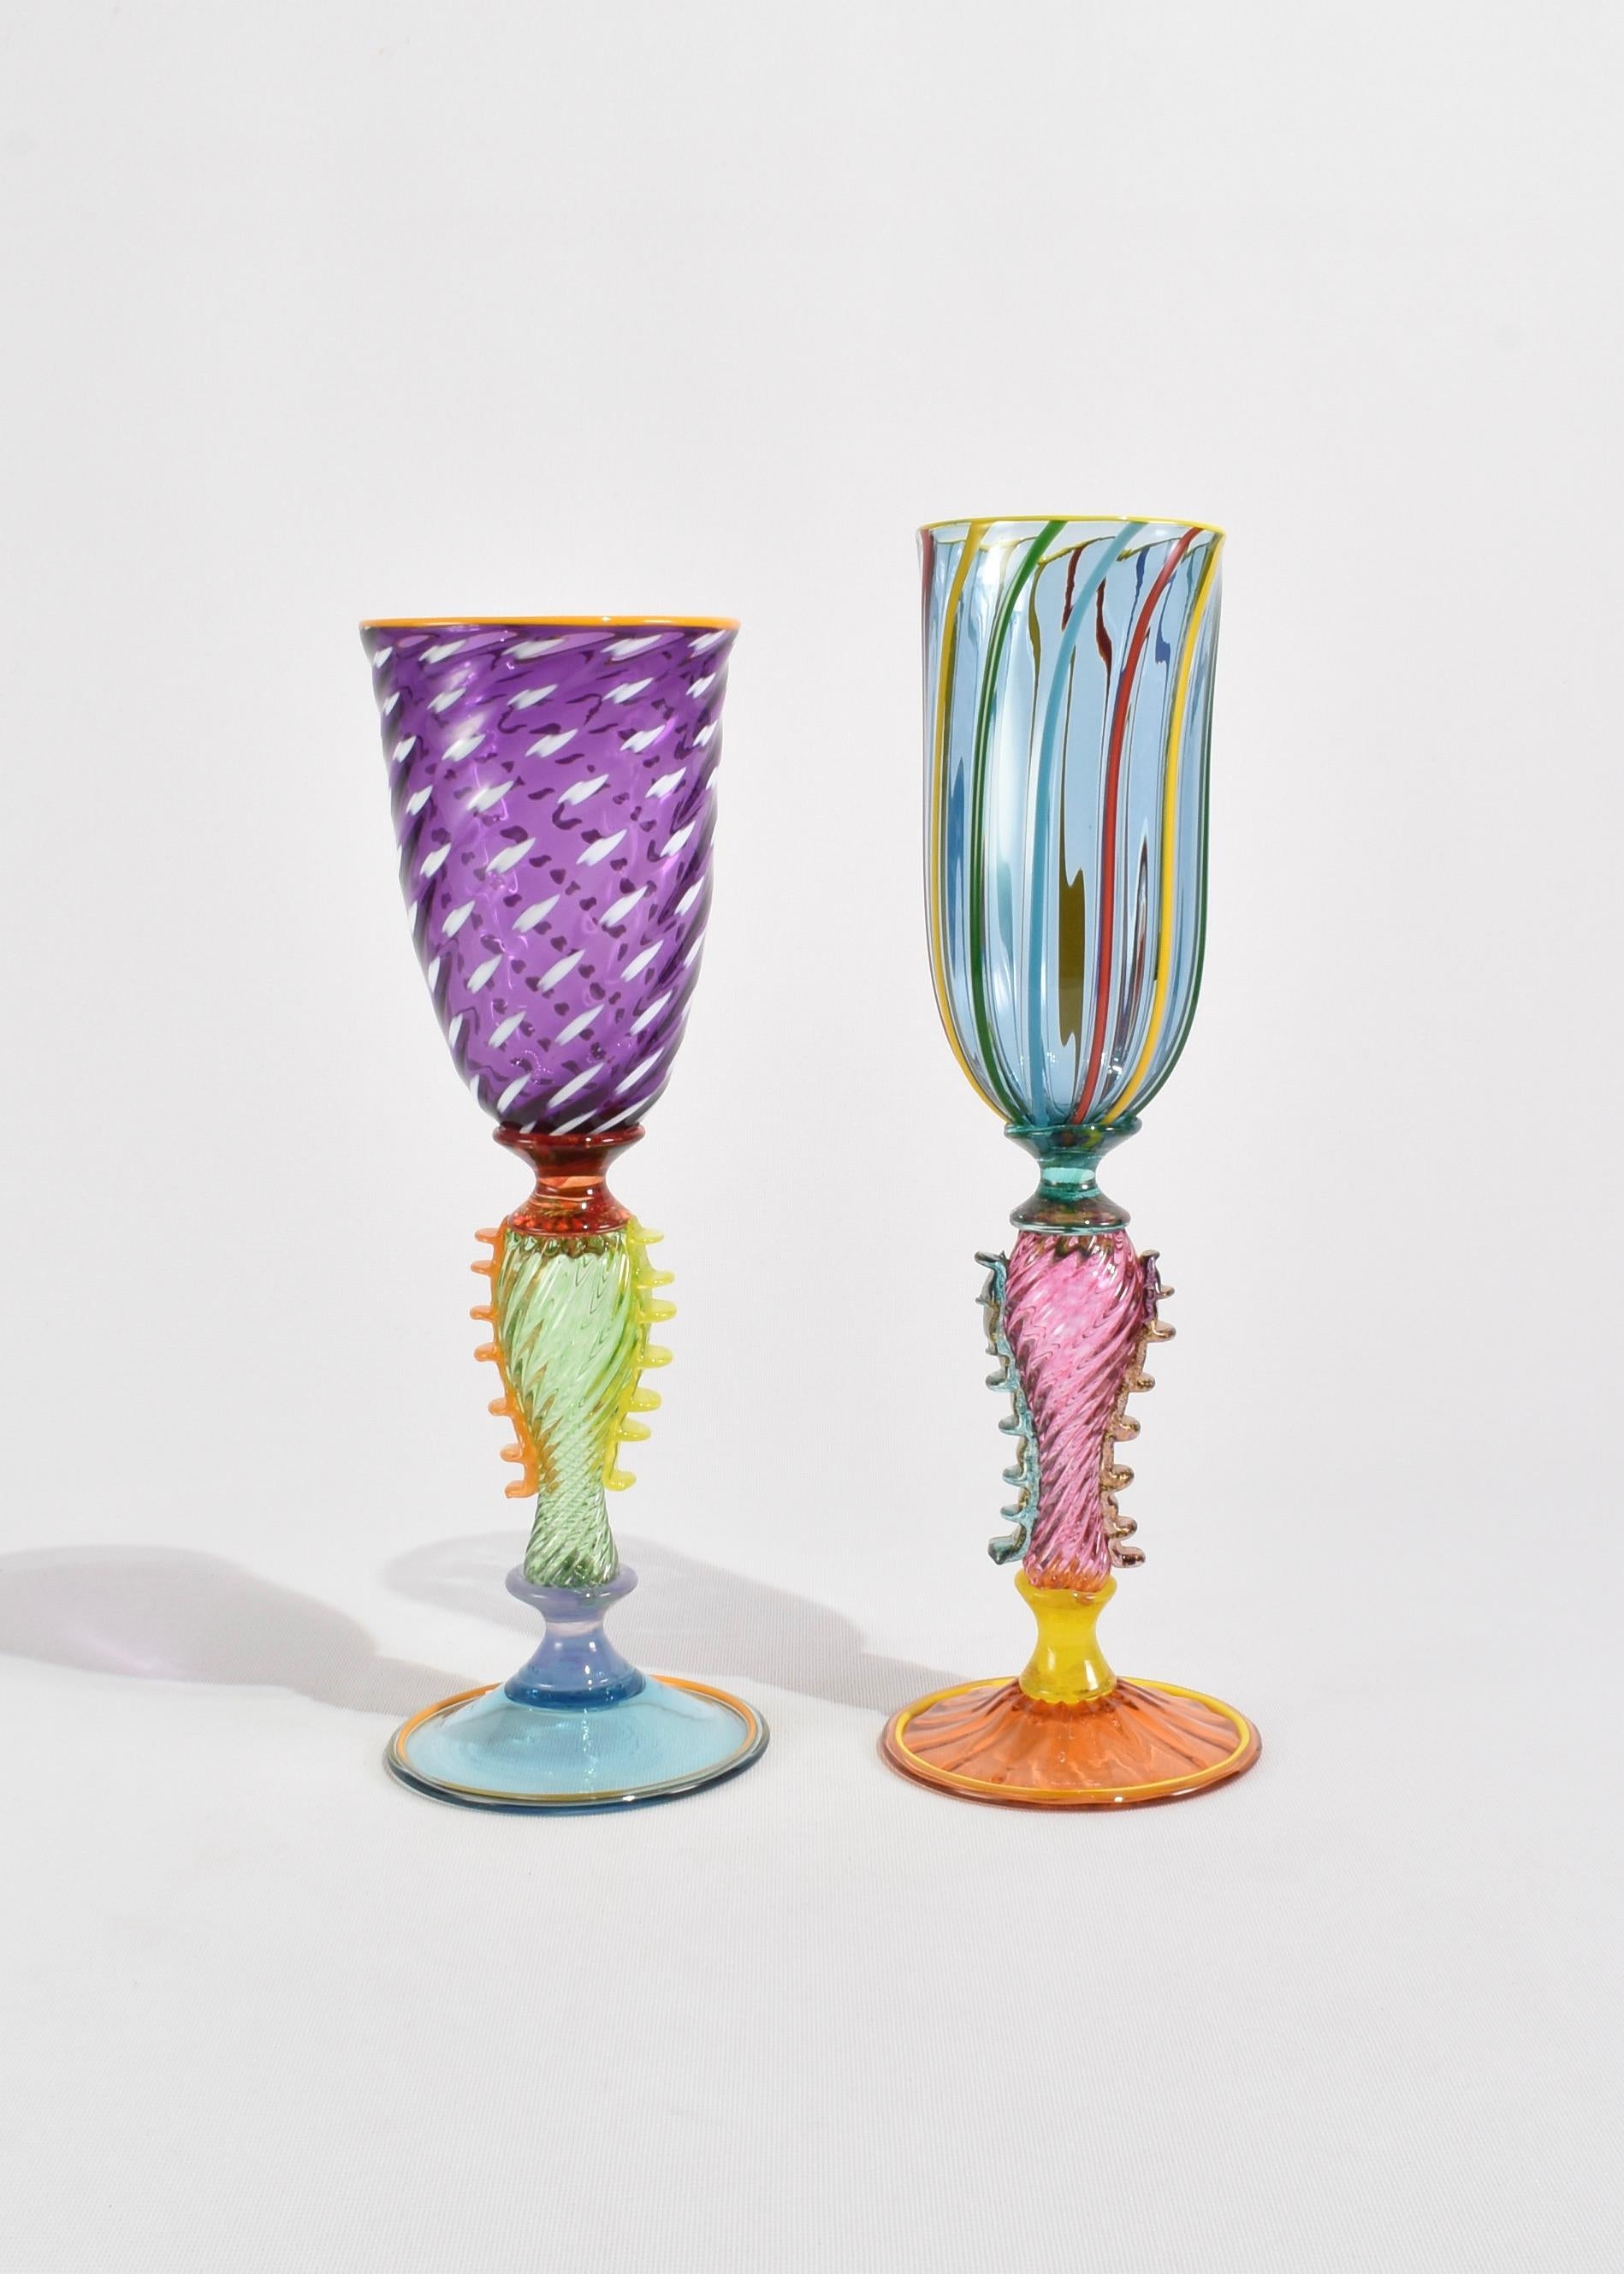 Colorful Venetian inspired glass goblet set by renowned artist, Robert Dane. Etched initials, RD, on the base. Please note the goblets vary slightly in height.

Robert's work is on display in numerous museums worldwide including the Smithsonian